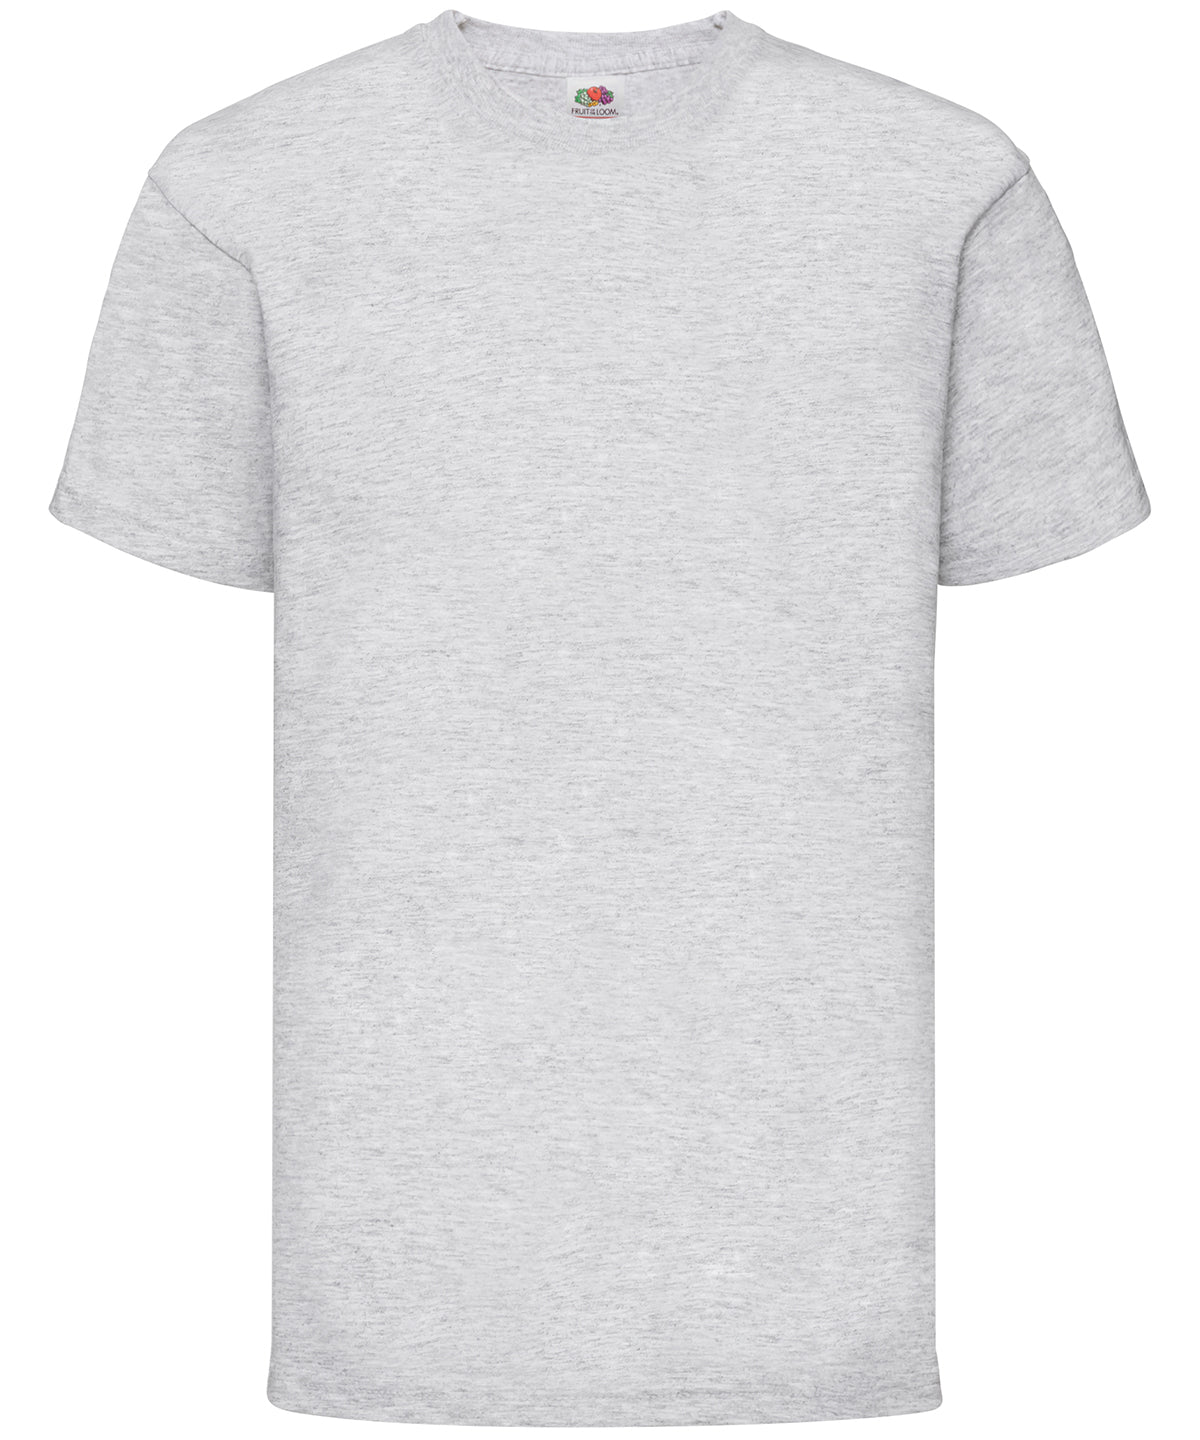 Fruit of the Loom Kids valueweight T Heather Grey